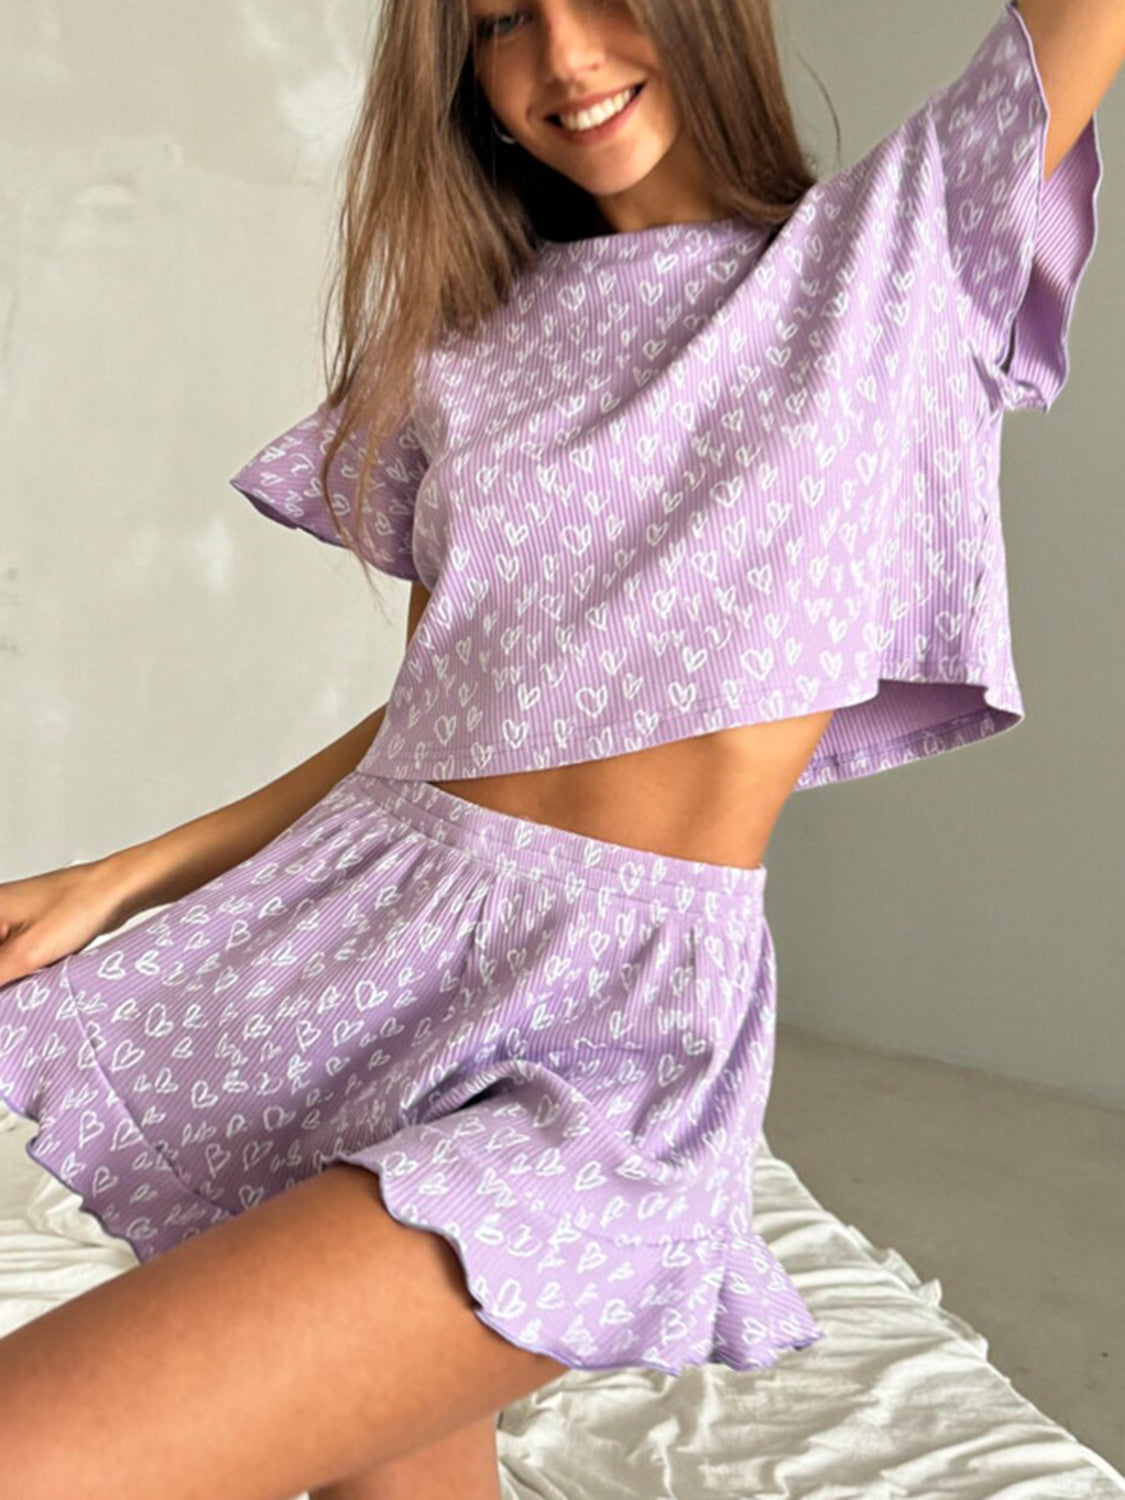 Printed Round Neck Top and Shorts Set